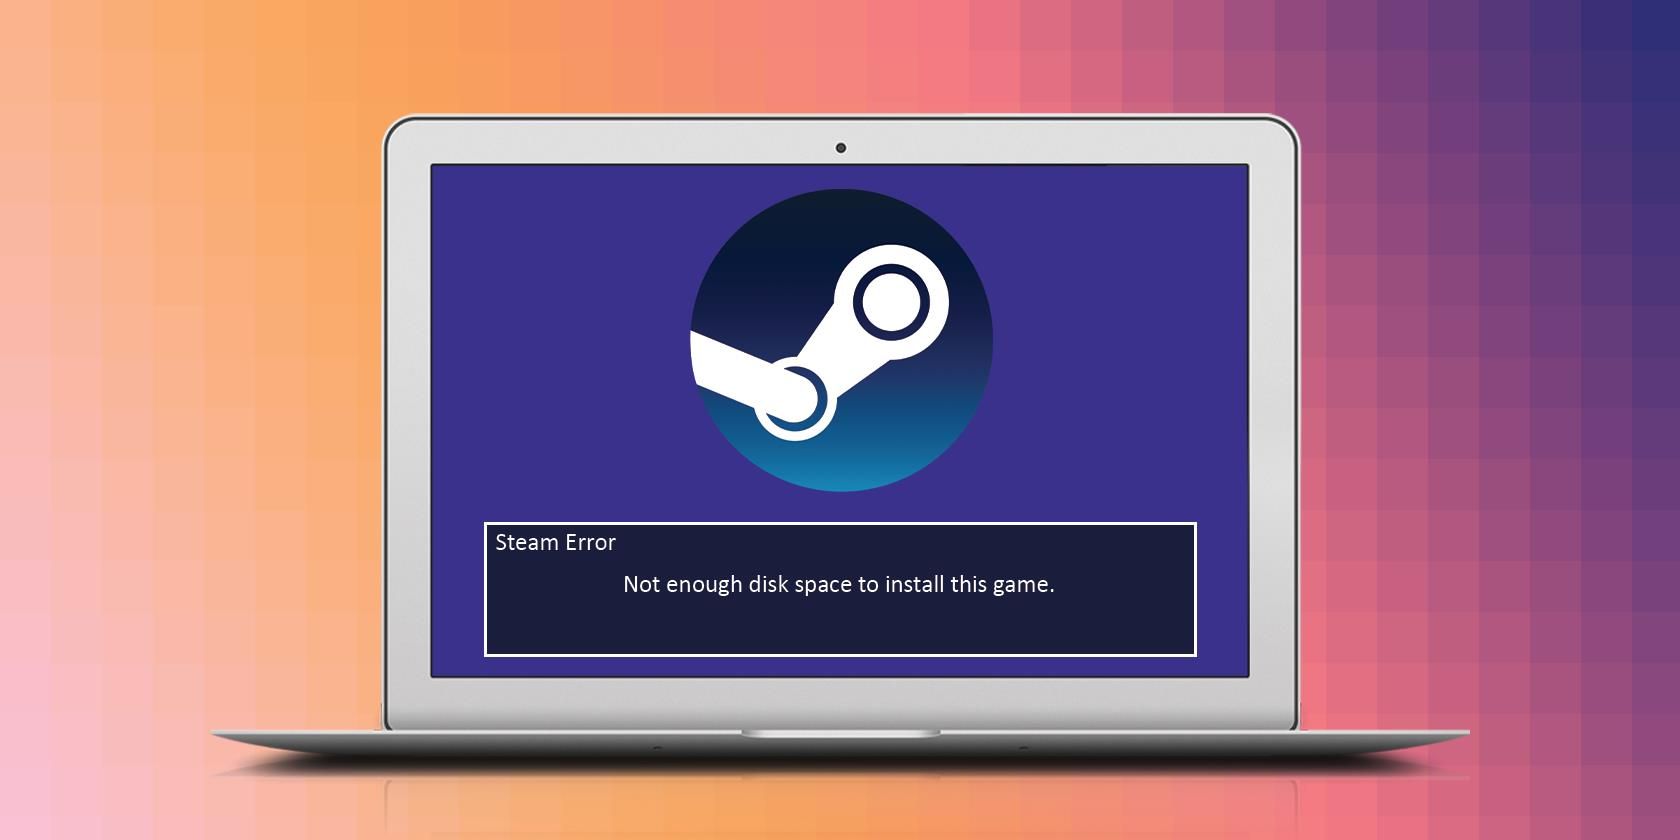 Disable steam runtime фото 54